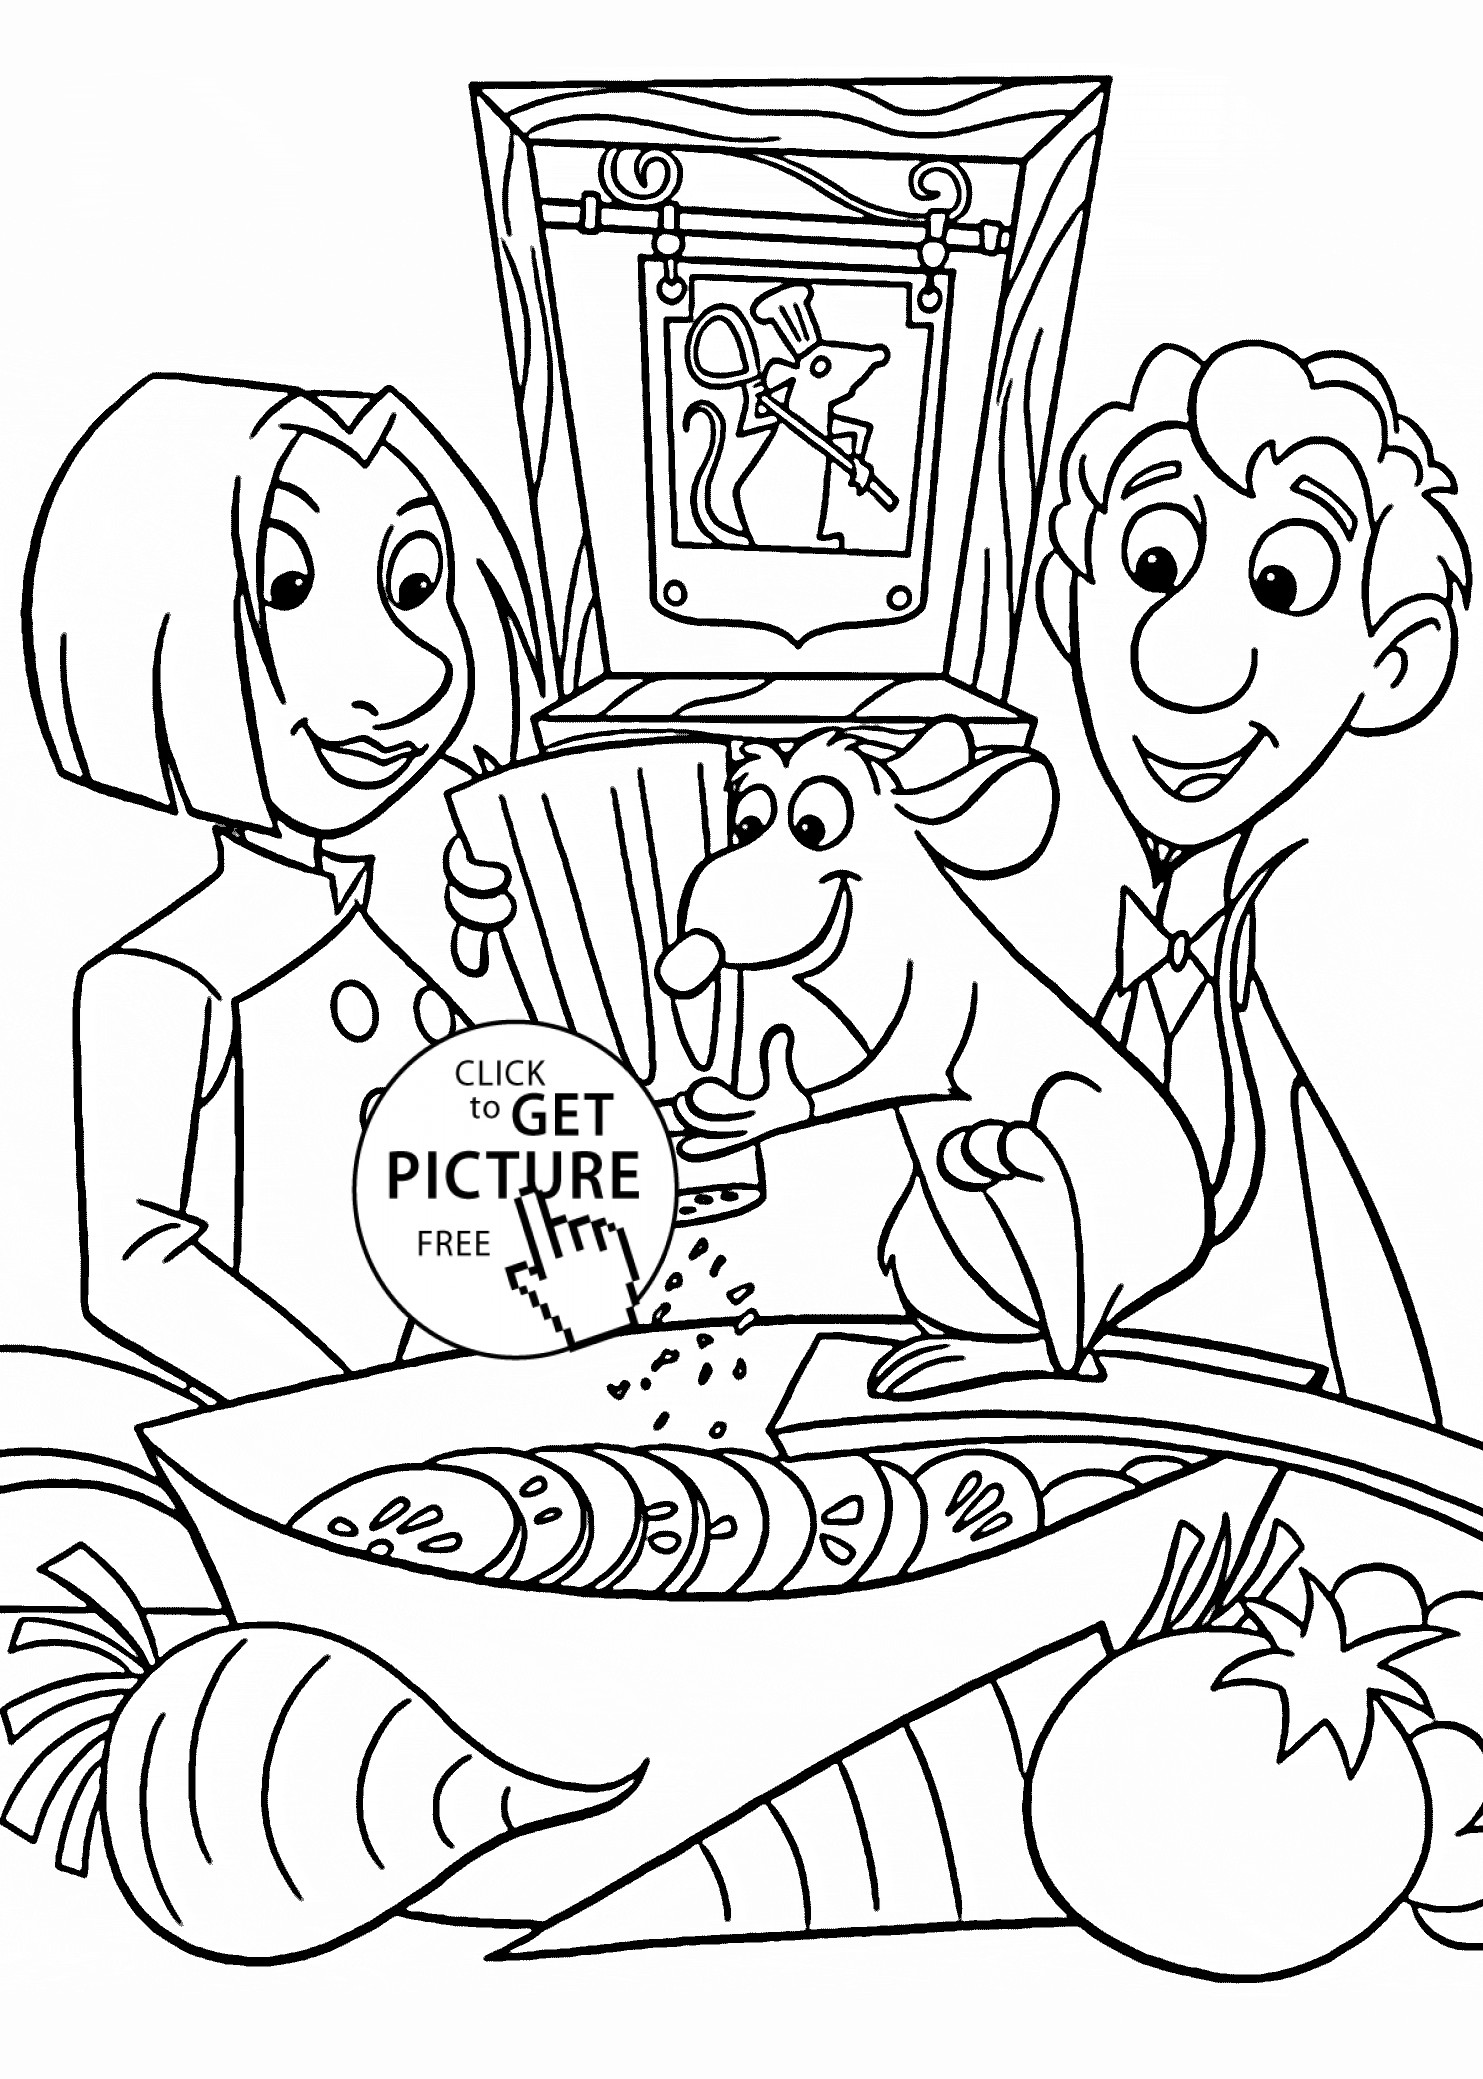 Cooking Coloring Book For Kids
 Ratatouille cooking coloring pages for kids printable free